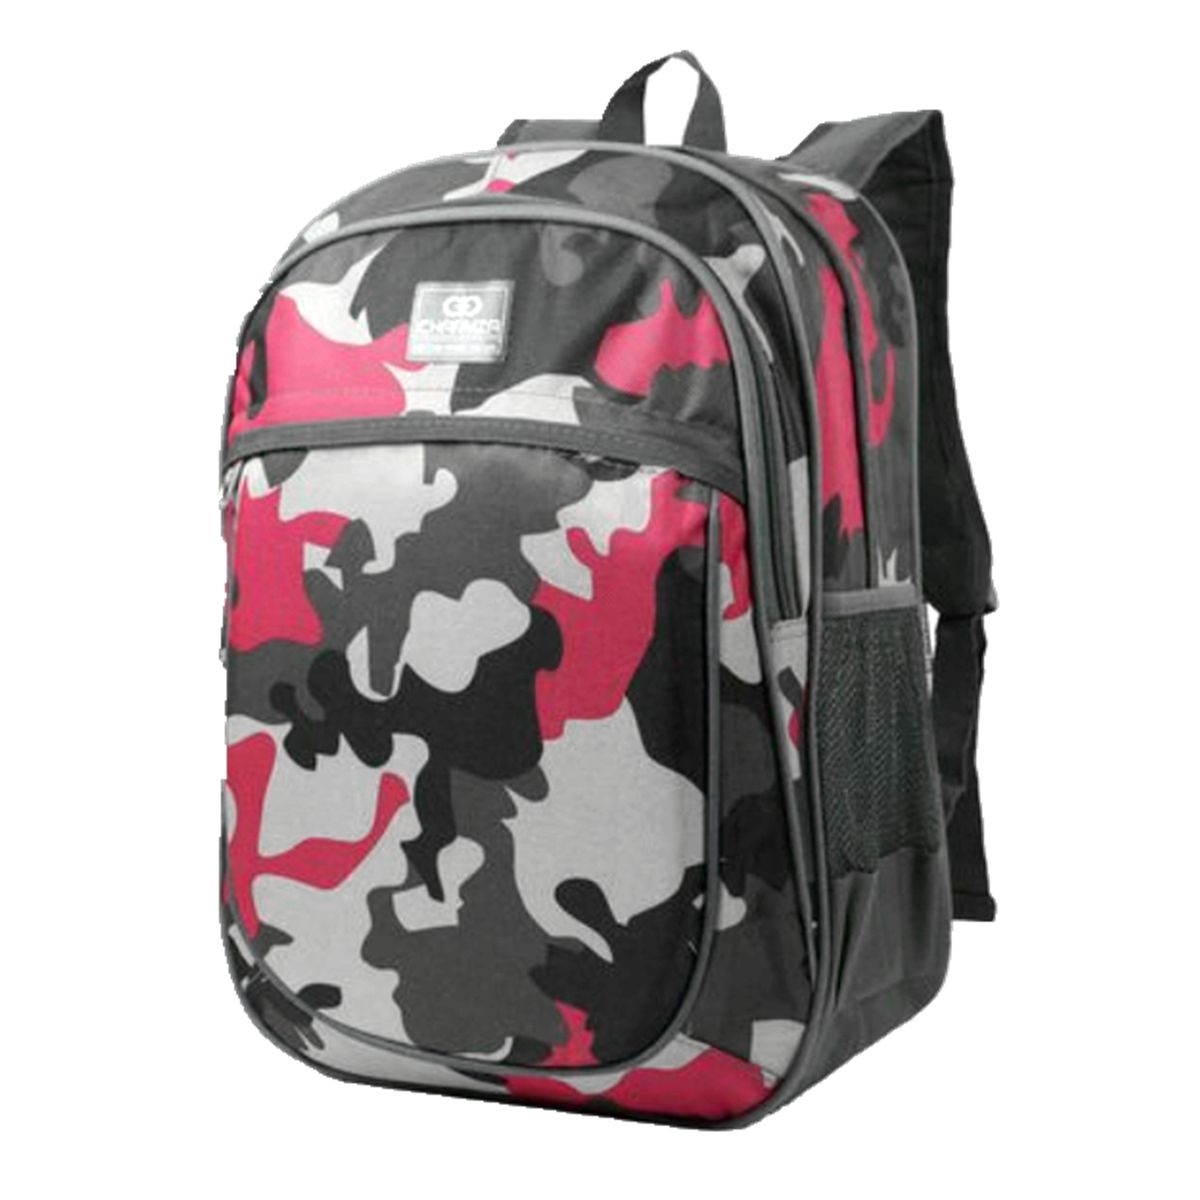 Aspirant School Backpack 20L - Airfore | Shop Today. Get it Tomorrow ...